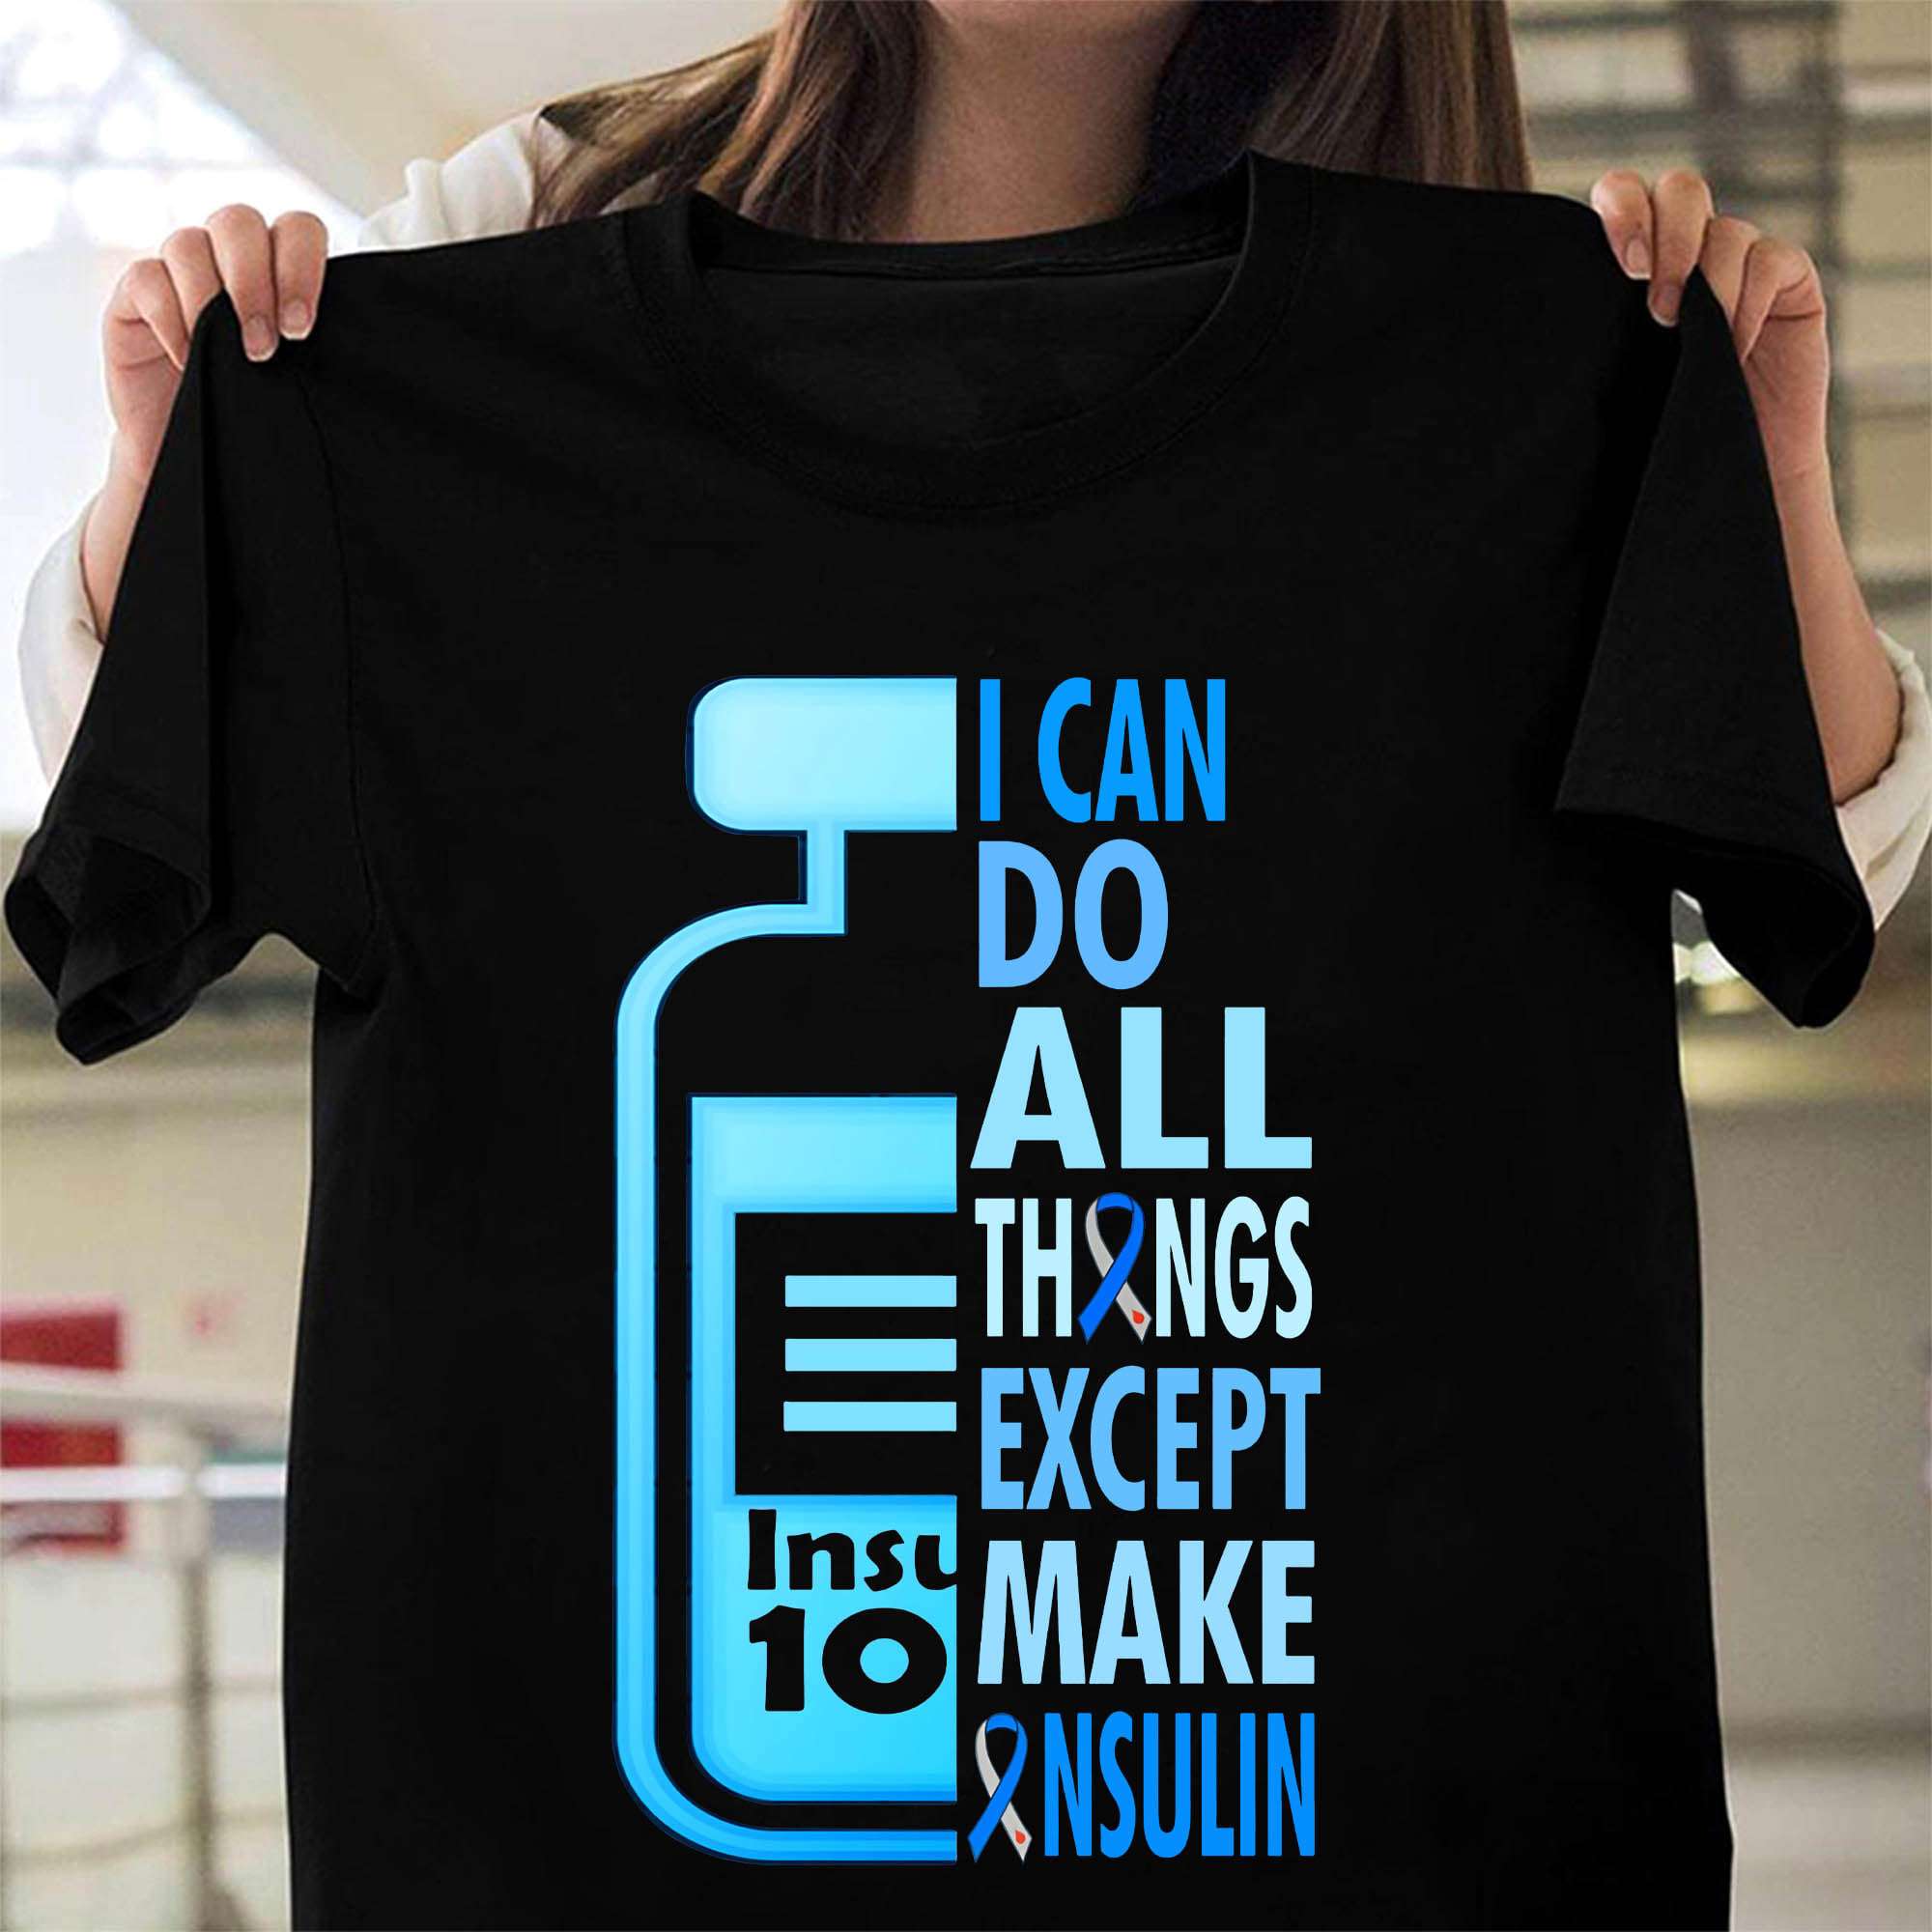 Insulin Bottle, Diabetes Awareness - I can do all things except make insulin